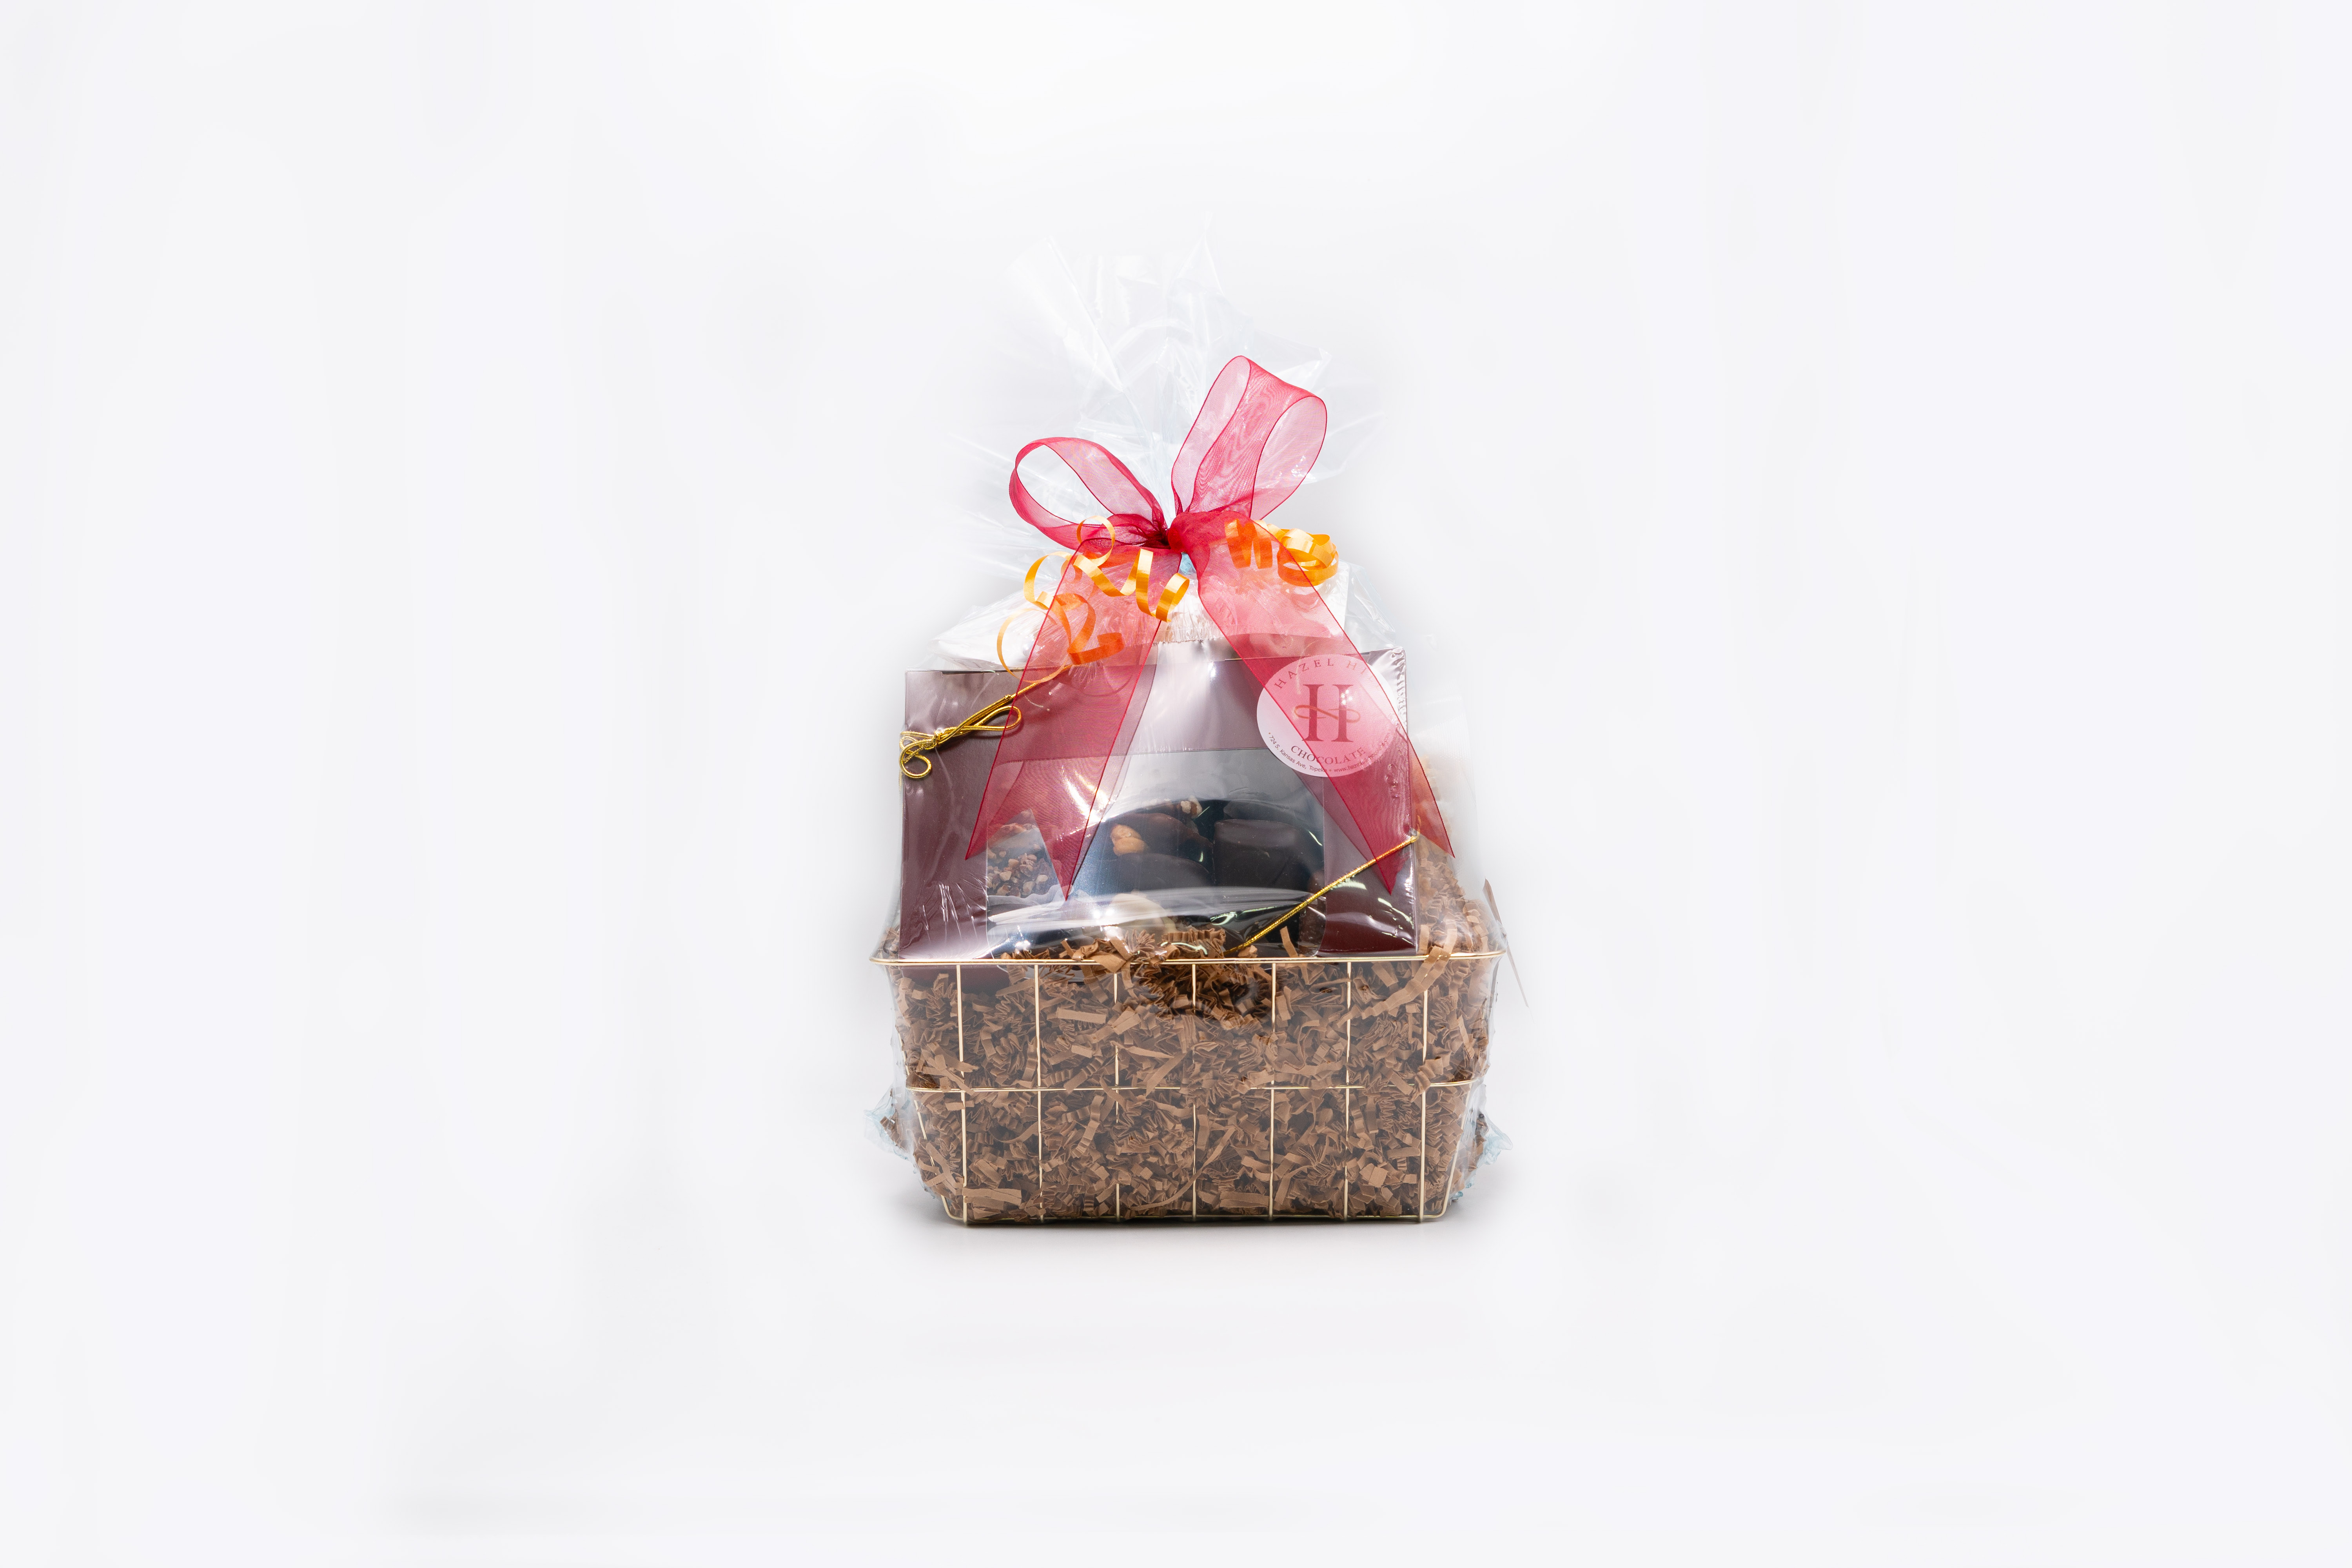 Treat Her Right Gift Basket